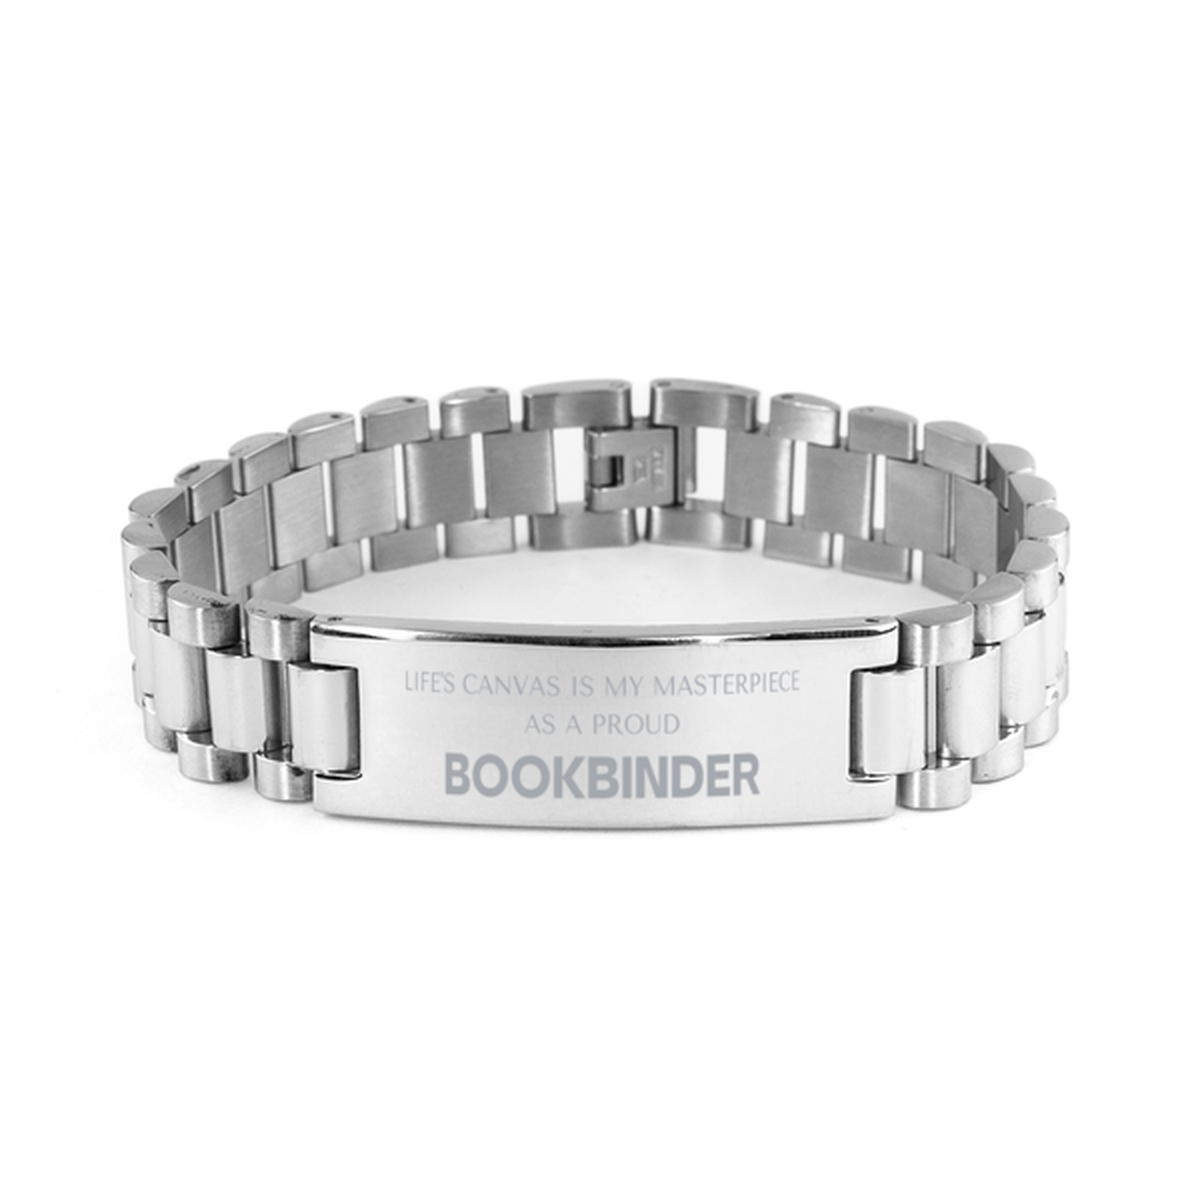 Proud Bookbinder Gifts, Life's canvas is my masterpiece, Epic Birthday Christmas Unique Ladder Stainless Steel Bracelet For Bookbinder, Coworkers, Men, Women, Friends